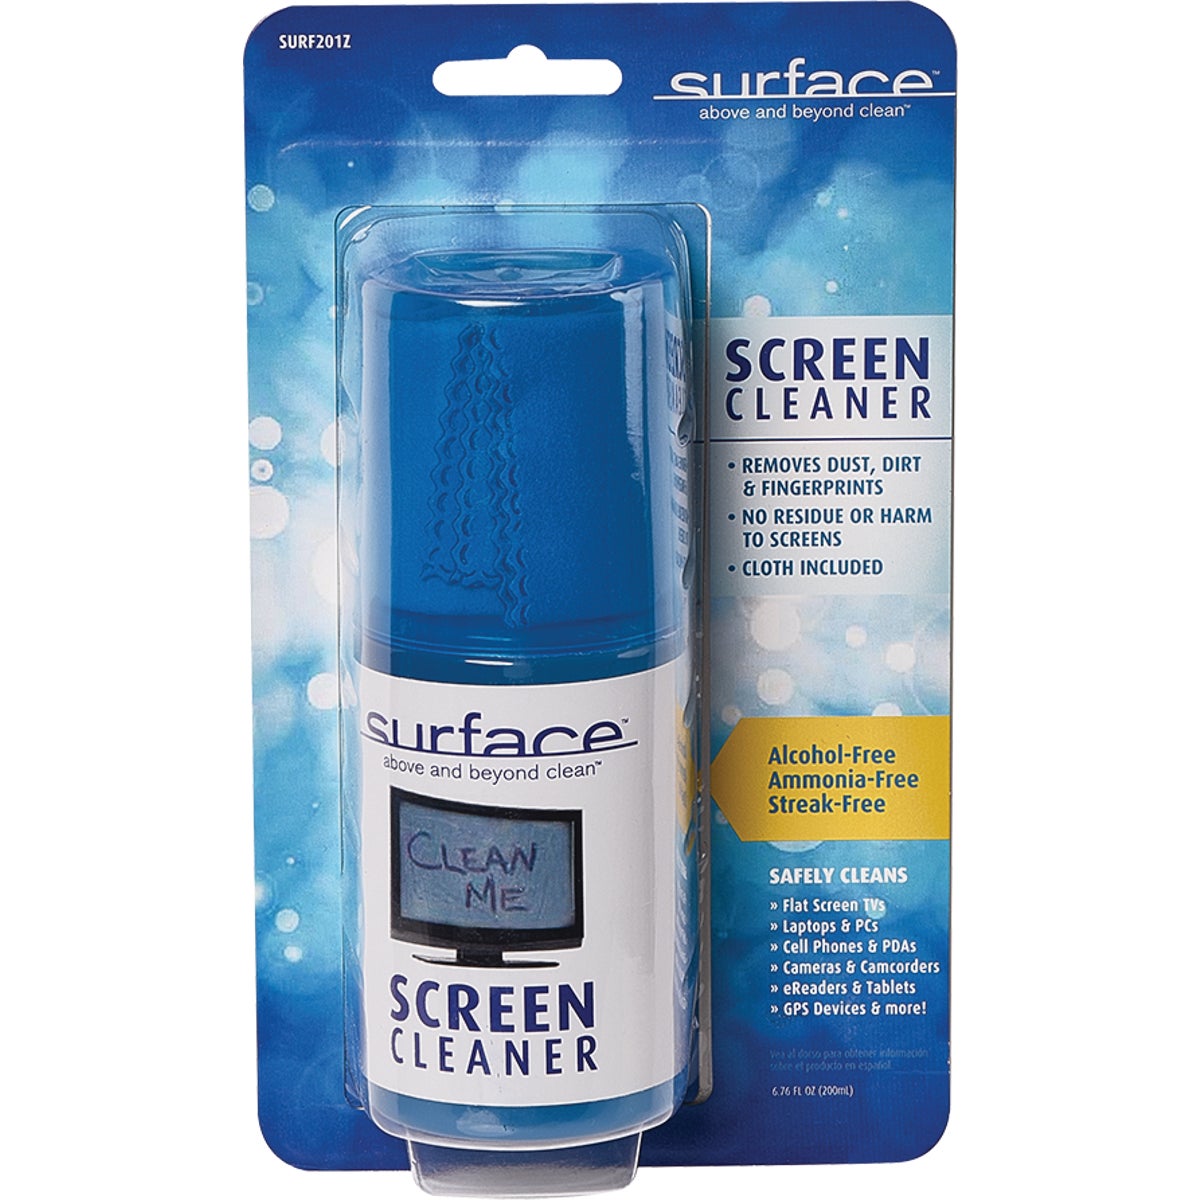 Item 500905, Screen cleaner kit includes bottle of cleaner and a microfiber cloth.